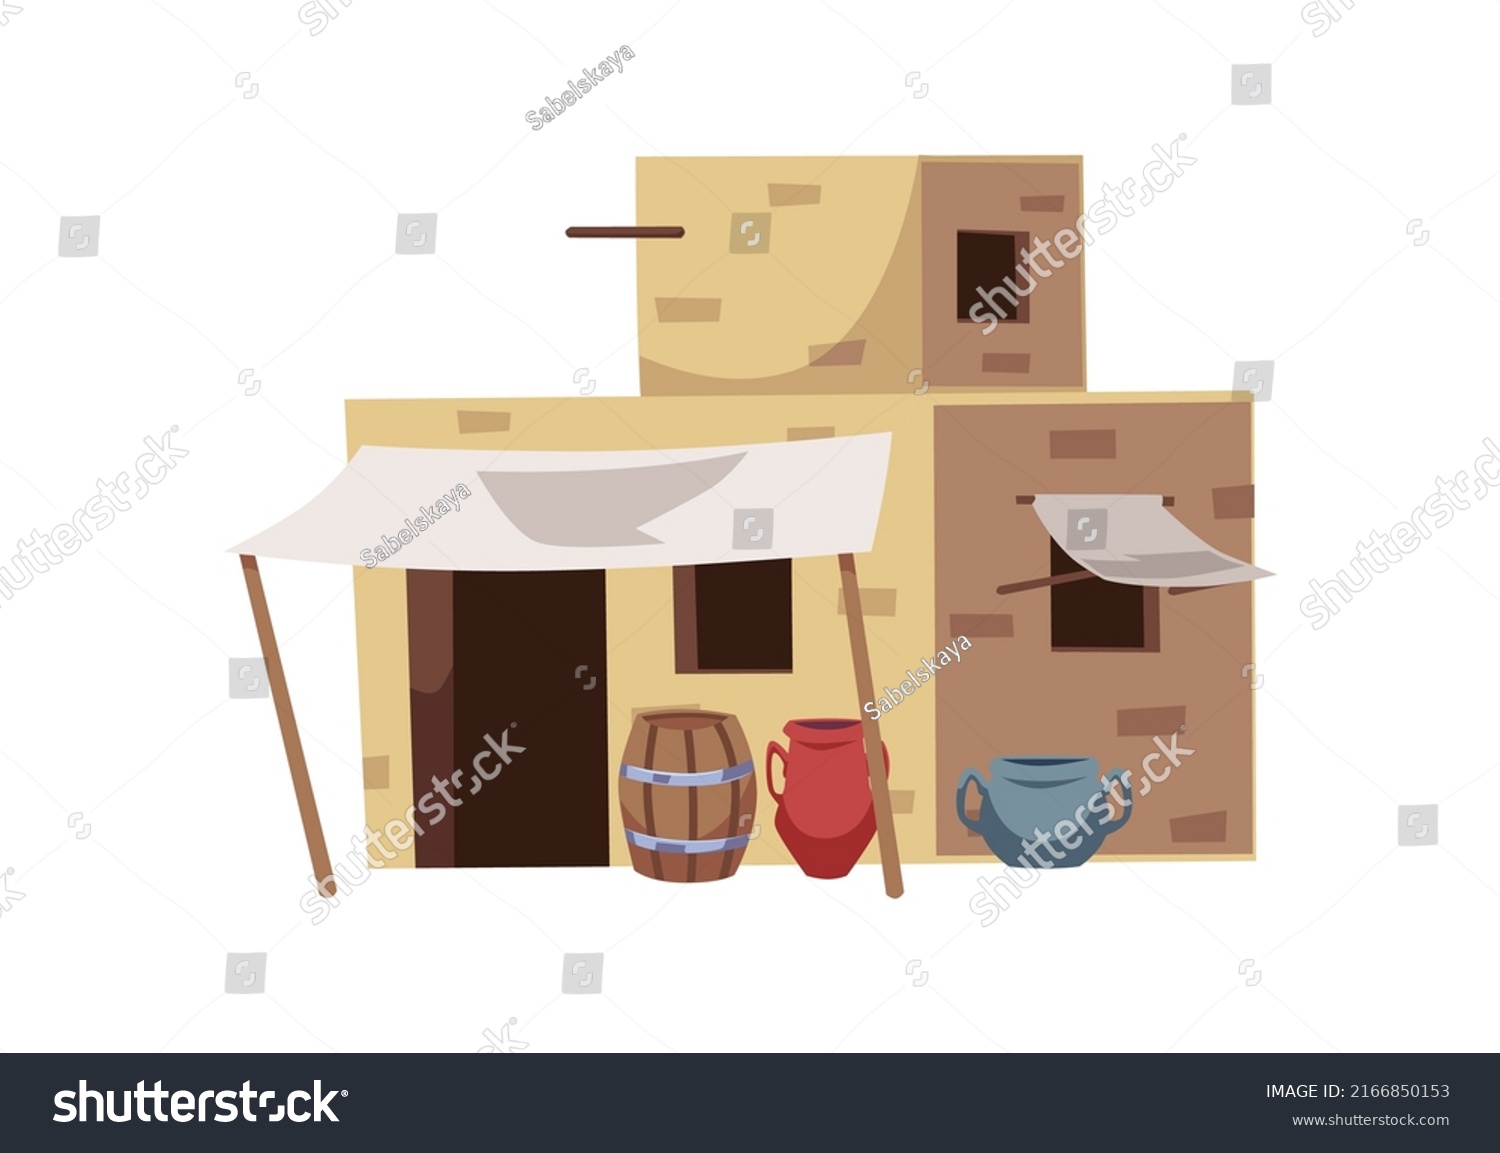 SVG of Arabian city building exterior, flat vector illustration isolated on white background. Traditional mud brick house with awnings and wooden barrels. Ancient Egypt residential or market buildings. svg